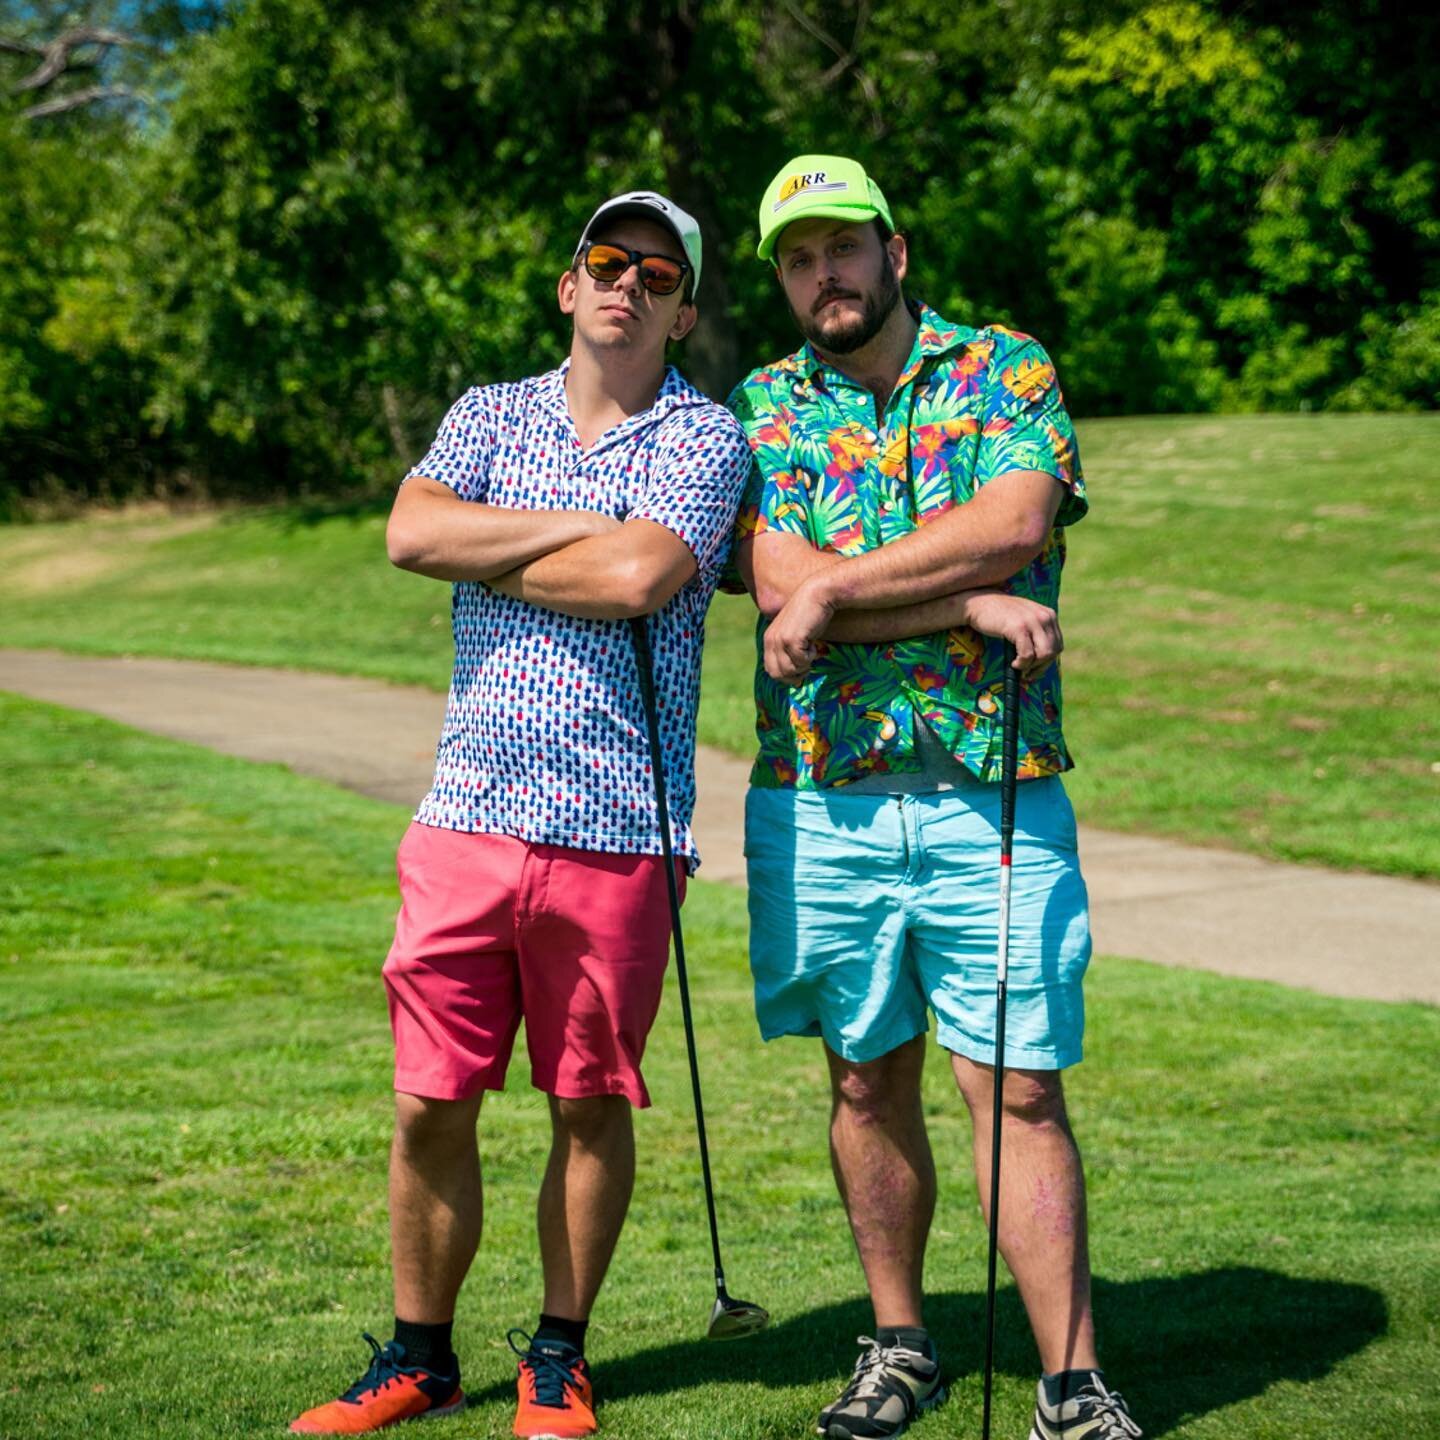 If only we had an award for &lsquo;Best Dressed&rsquo;. #phfgolftourney22 #livelikepatrick